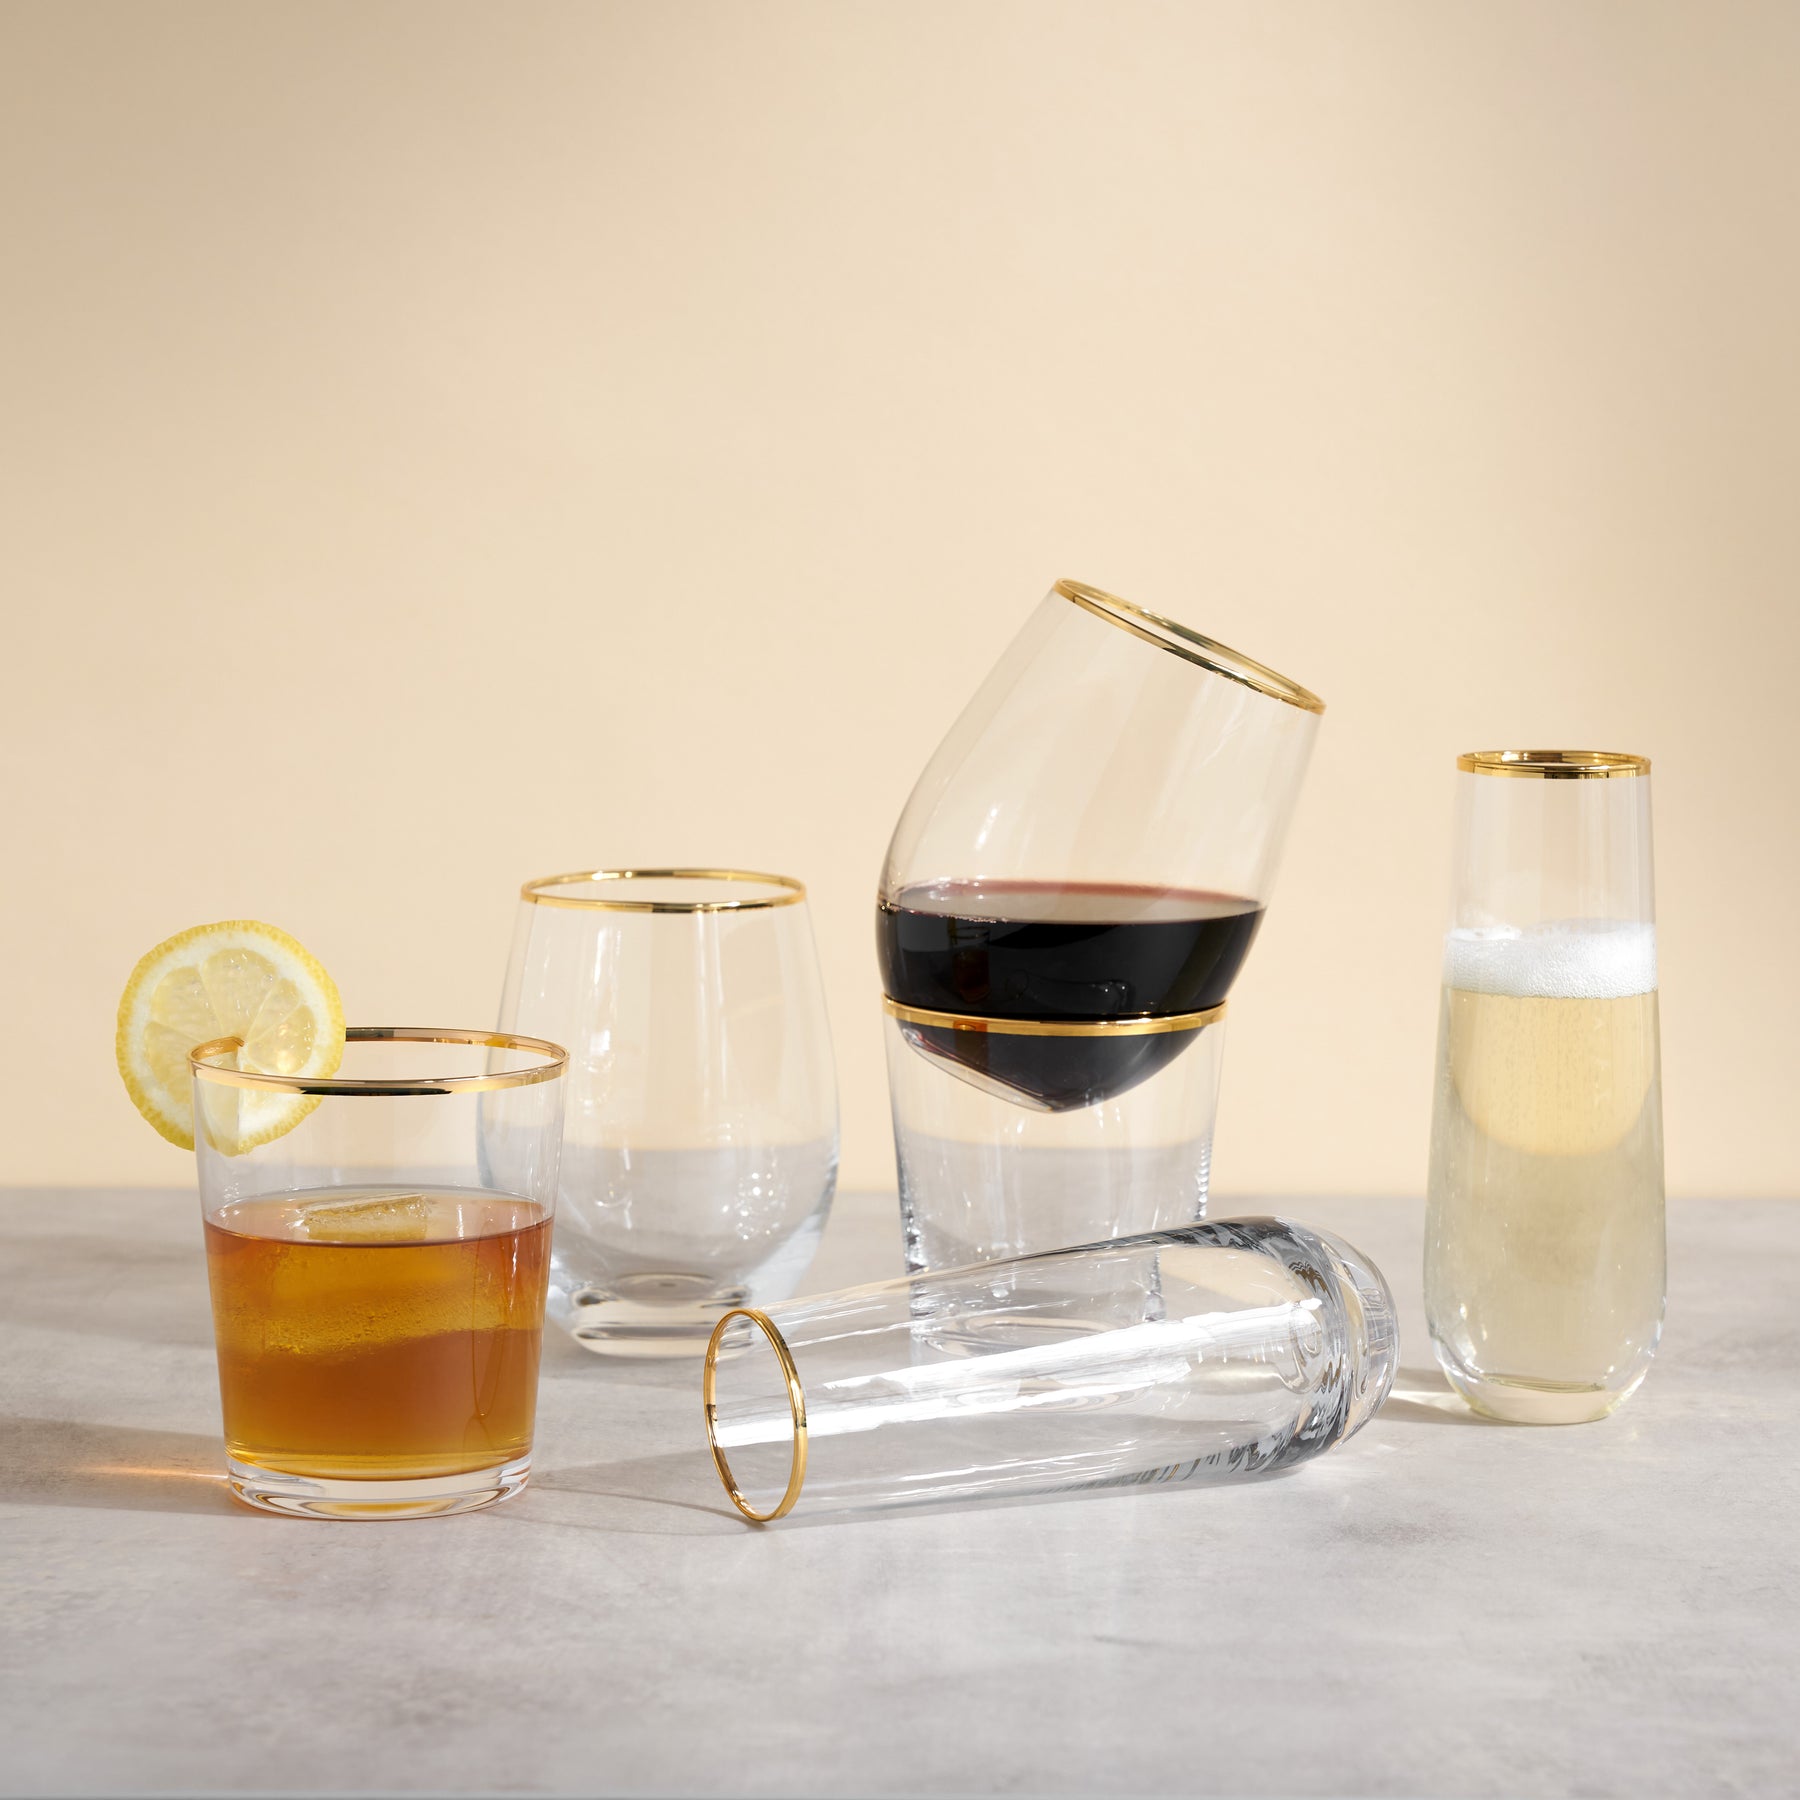 Kitchen Lux Gold-Dipped Stemless Wine Glass, Drinking Glasses